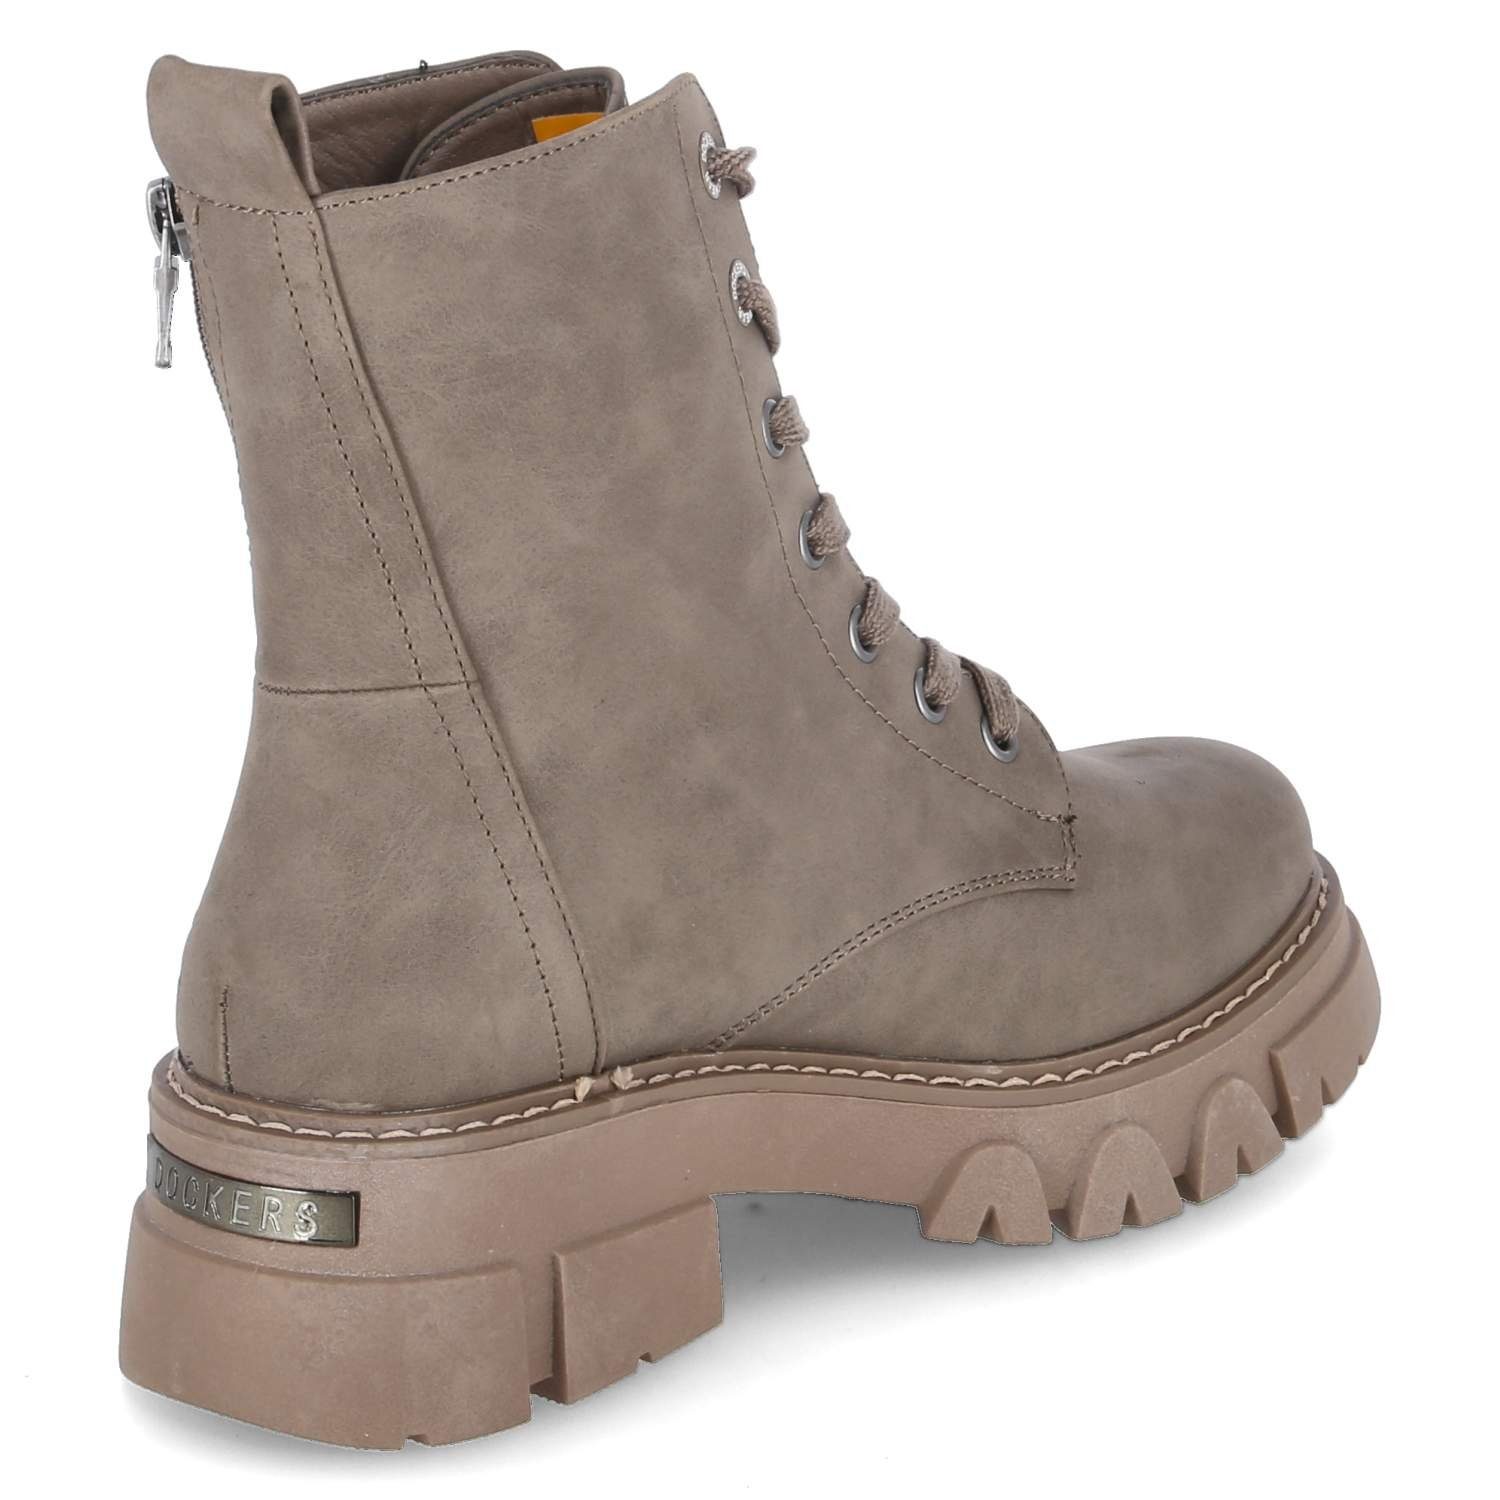 Dockers by Gerli Boots Combat Schnürstiefel taupe 630430